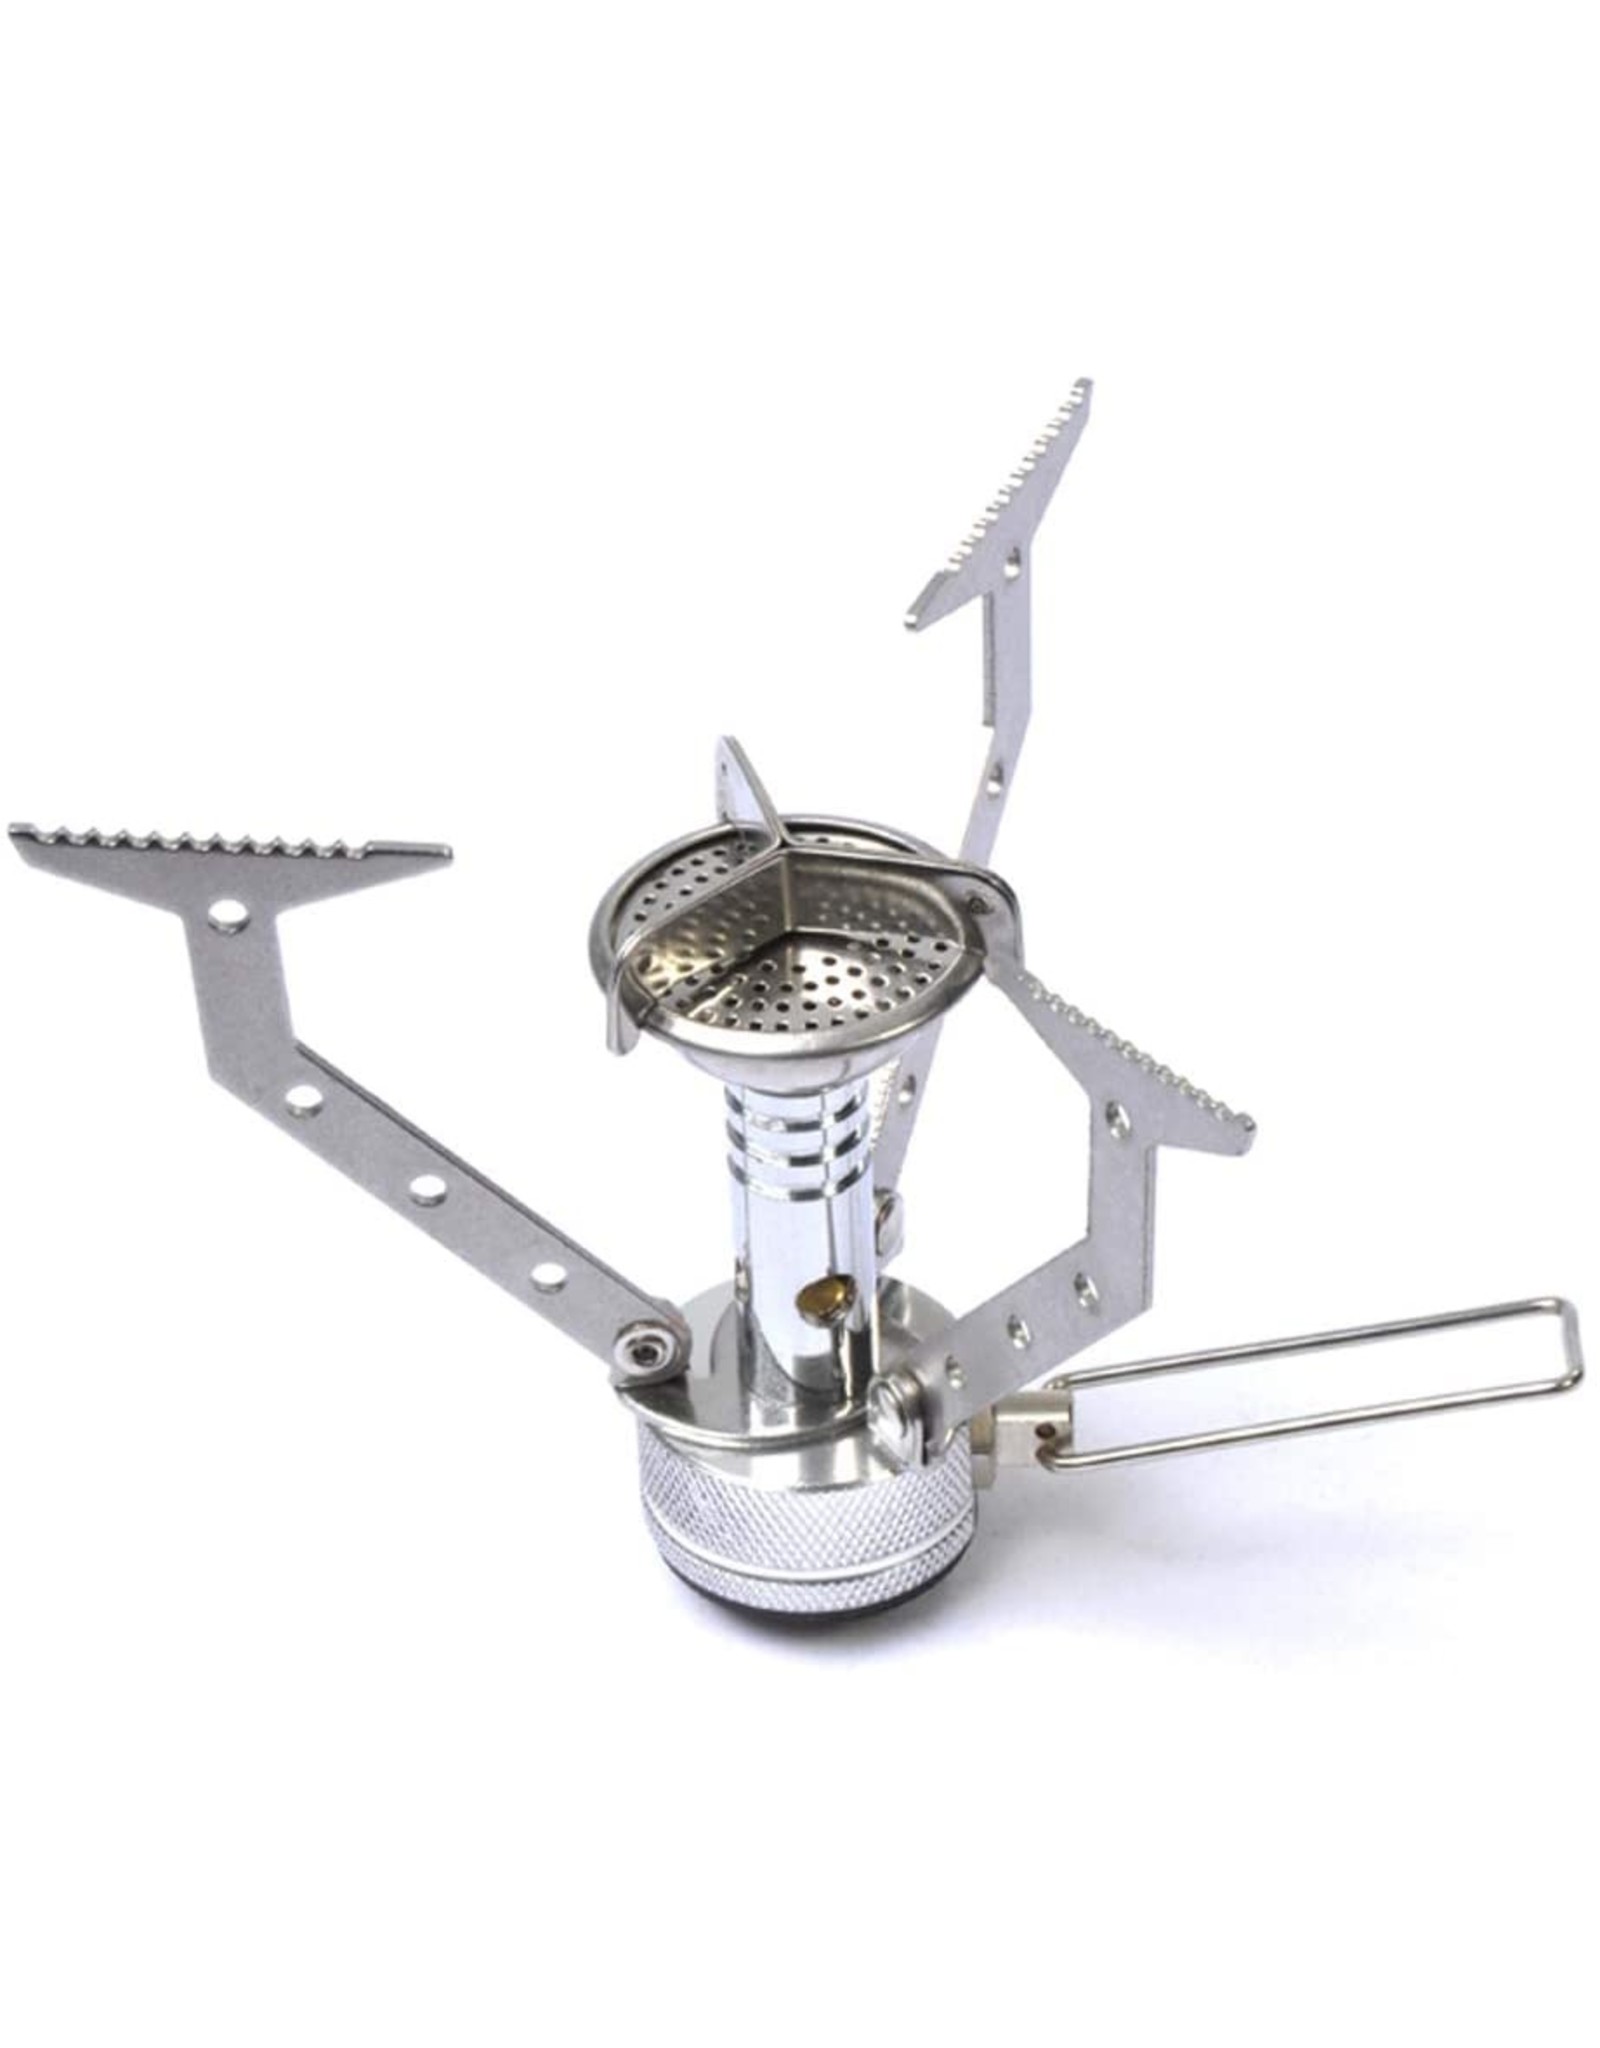 ACE CAMP FIRE BALL GAS STOVE